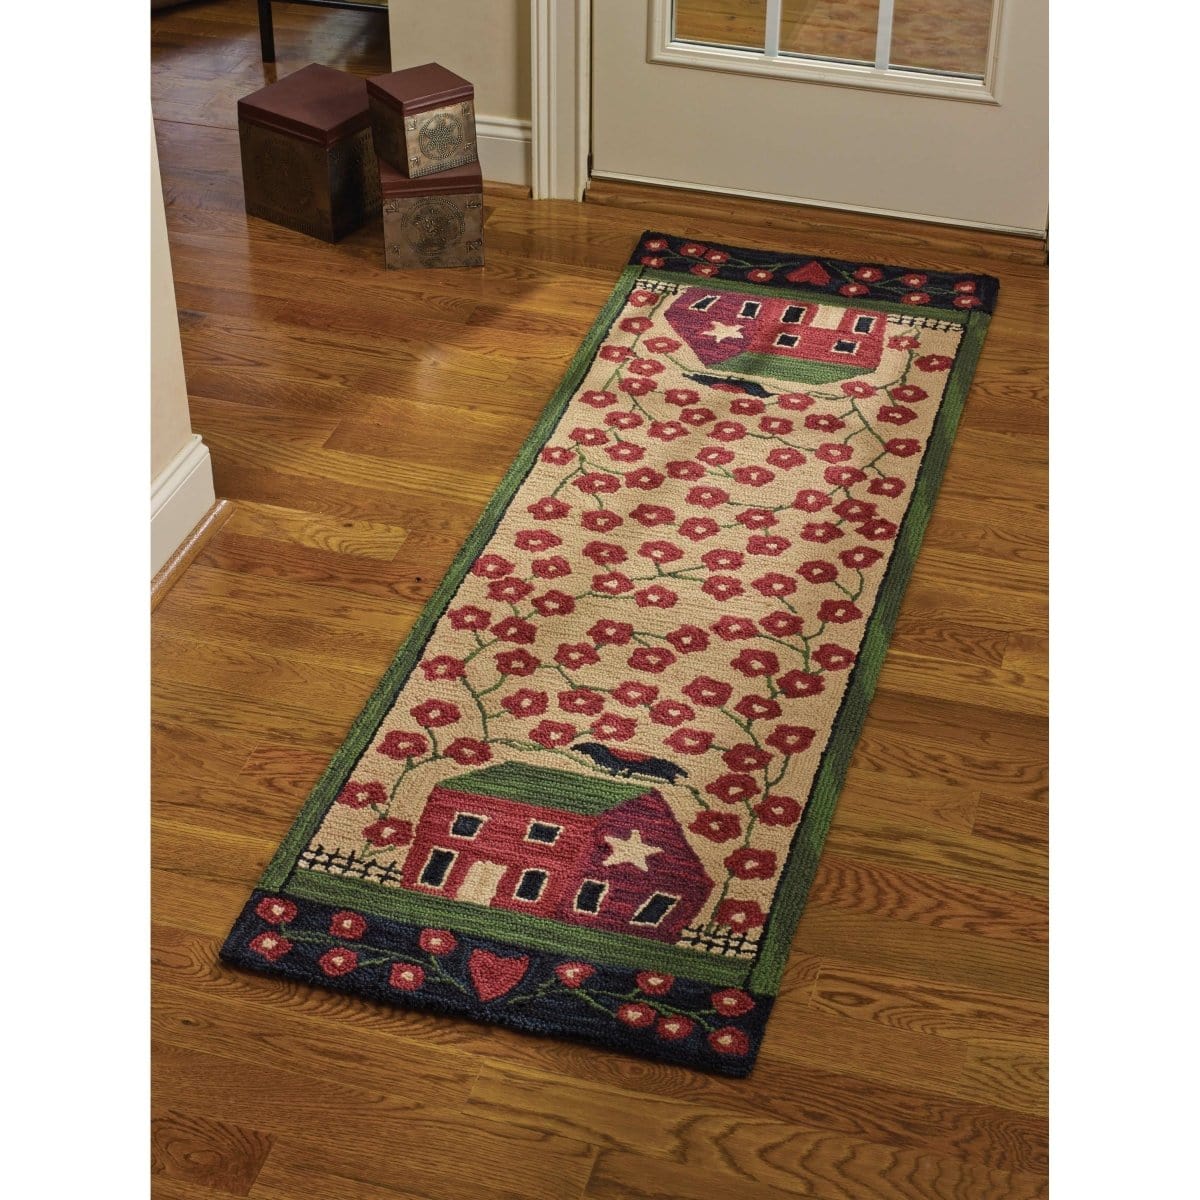 Red House Hooked Rug 24" x 72" Runner-Park Designs-The Village Merchant